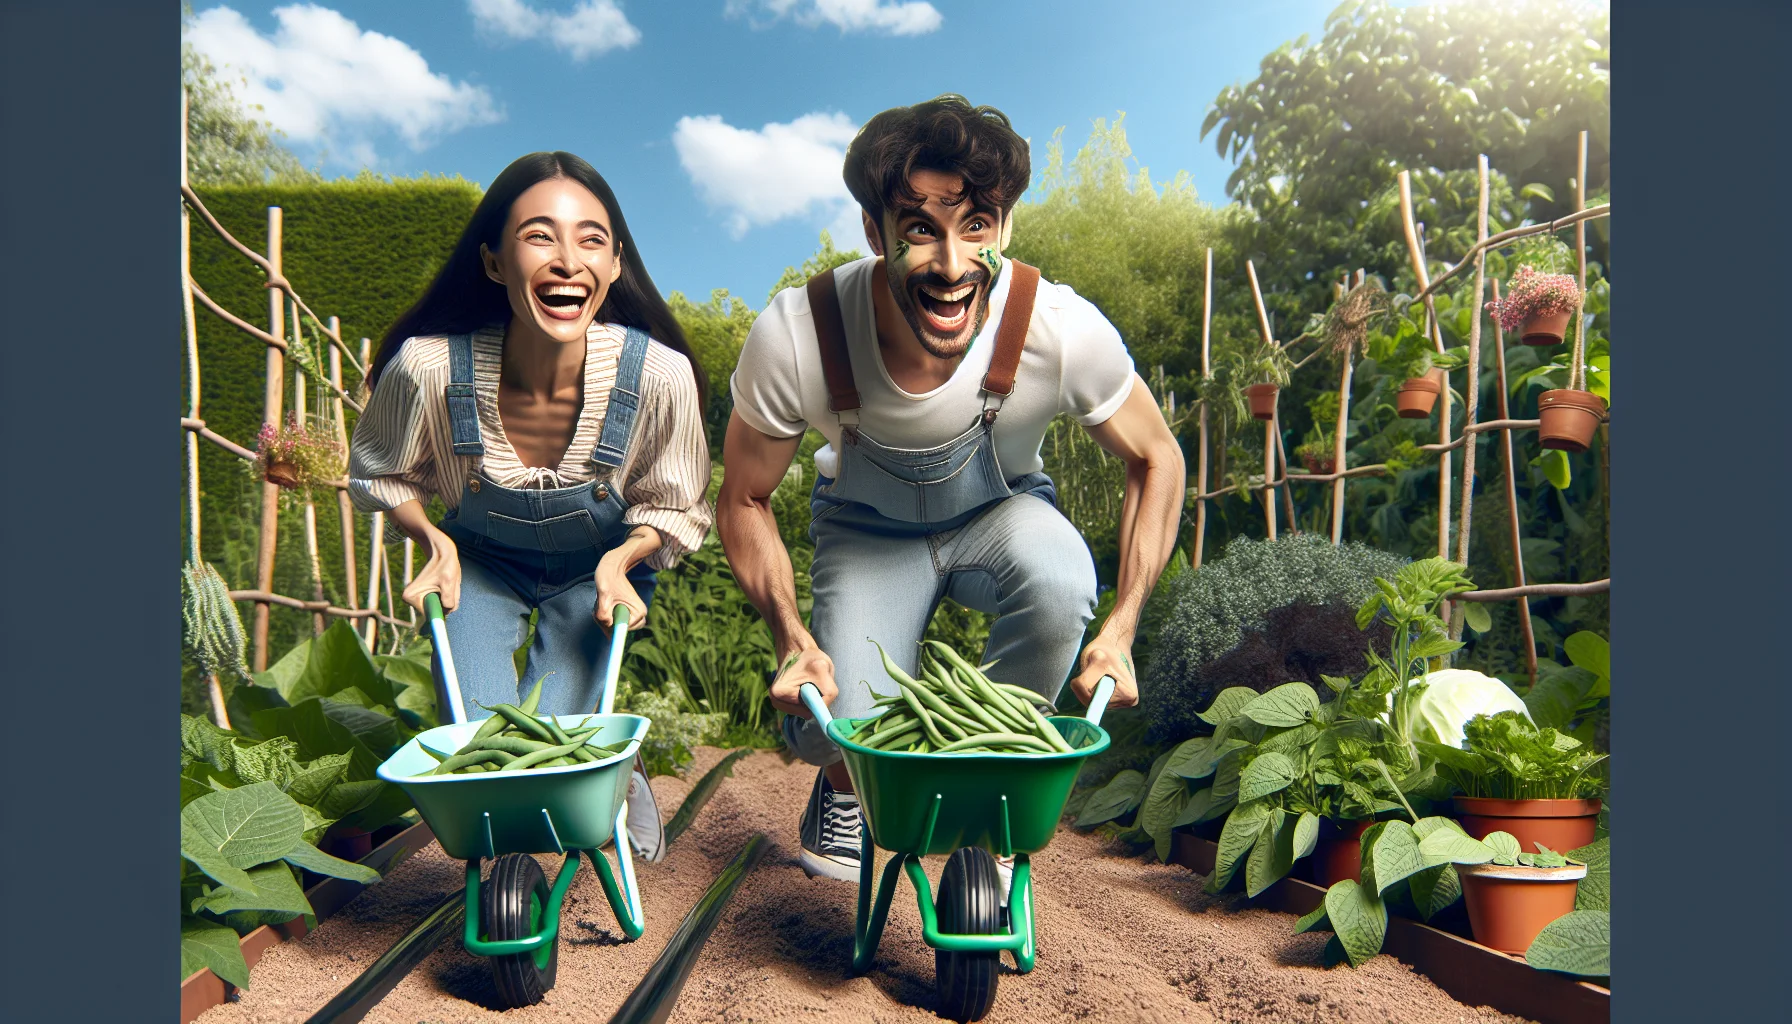 Depict a humorous and charming scene where a South Asian woman and a Caucasian man, both dressed in casual gardening outfits, are in the midst of a lively garden. They're having an unusually competitive race with small wheelbarrows overflowing with raw green beans. Their jovial expressions and animated movements suggest that they're greatly enjoying their time. Include lush, verdant foliage of various other plants surrounding them, to stress the beauty and joy of gardening. A bright, sunny day with clear blue sky adds to the overall pleasing tone of the scene.